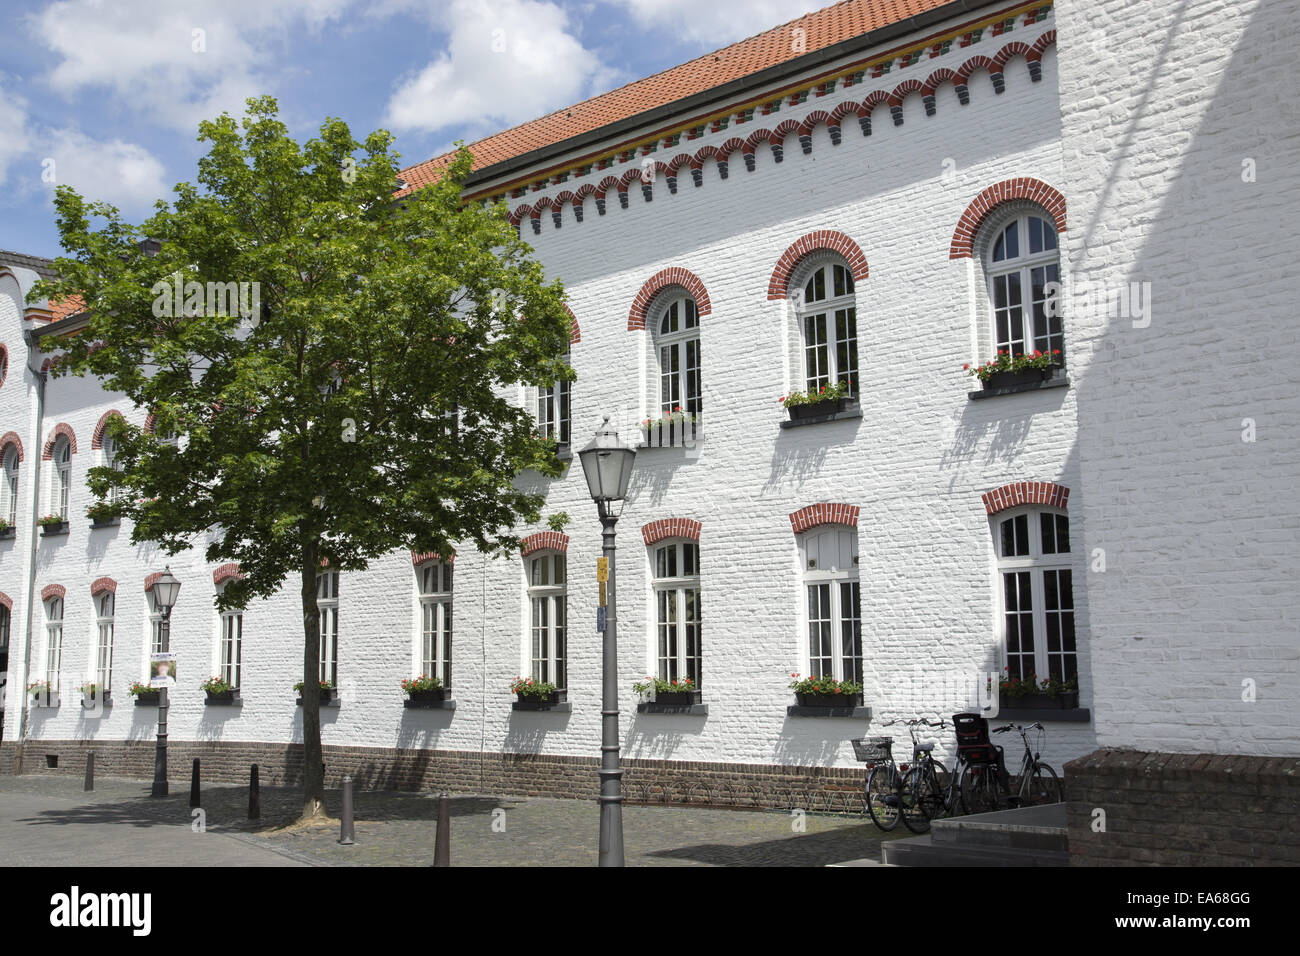 Town hall in Xanten, Germany Stock Photo